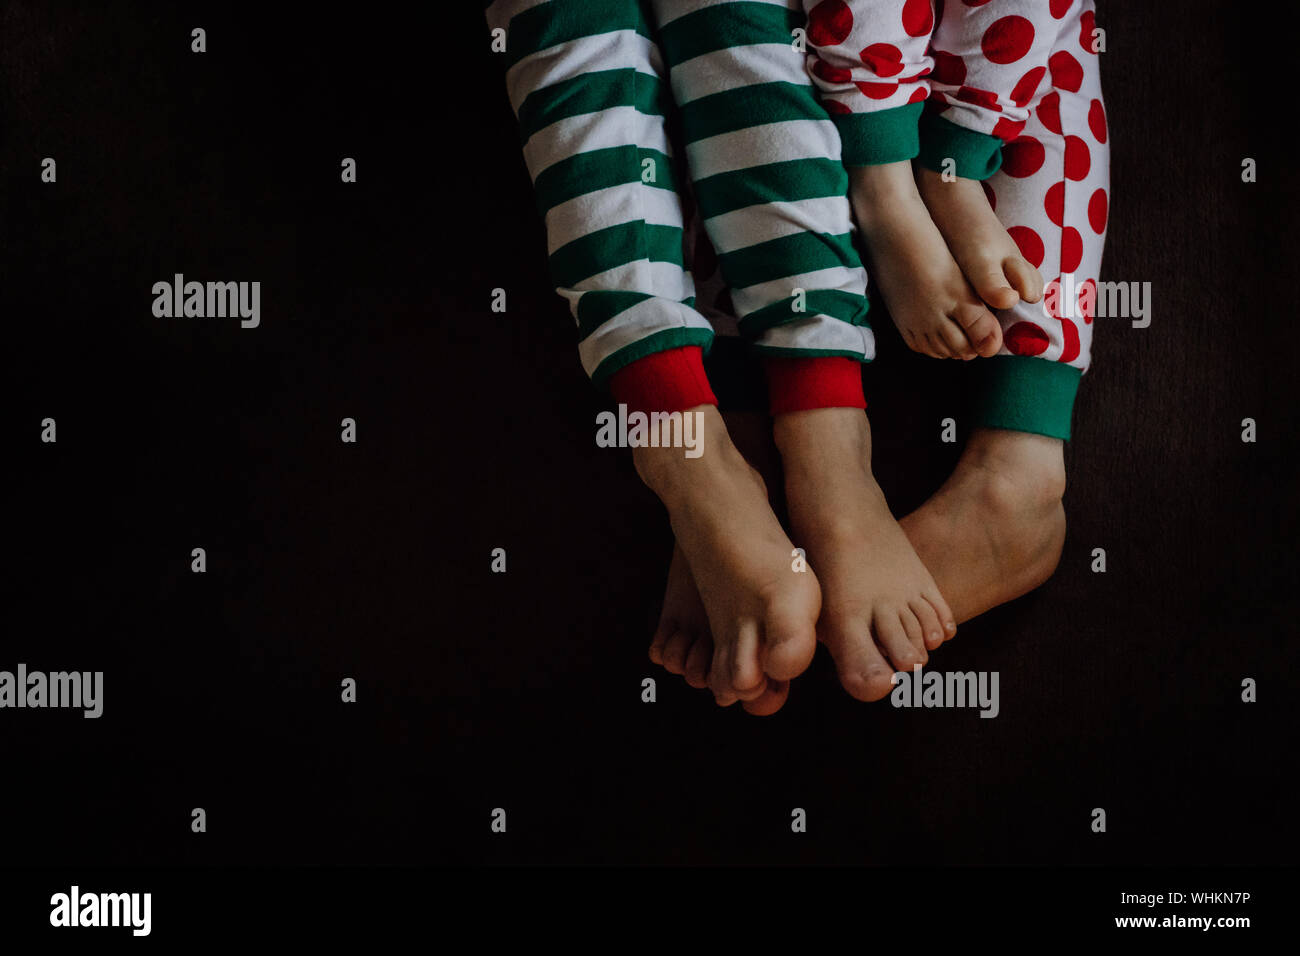 Low Section Of Family In Pajamas Against Black Background Stock Photo